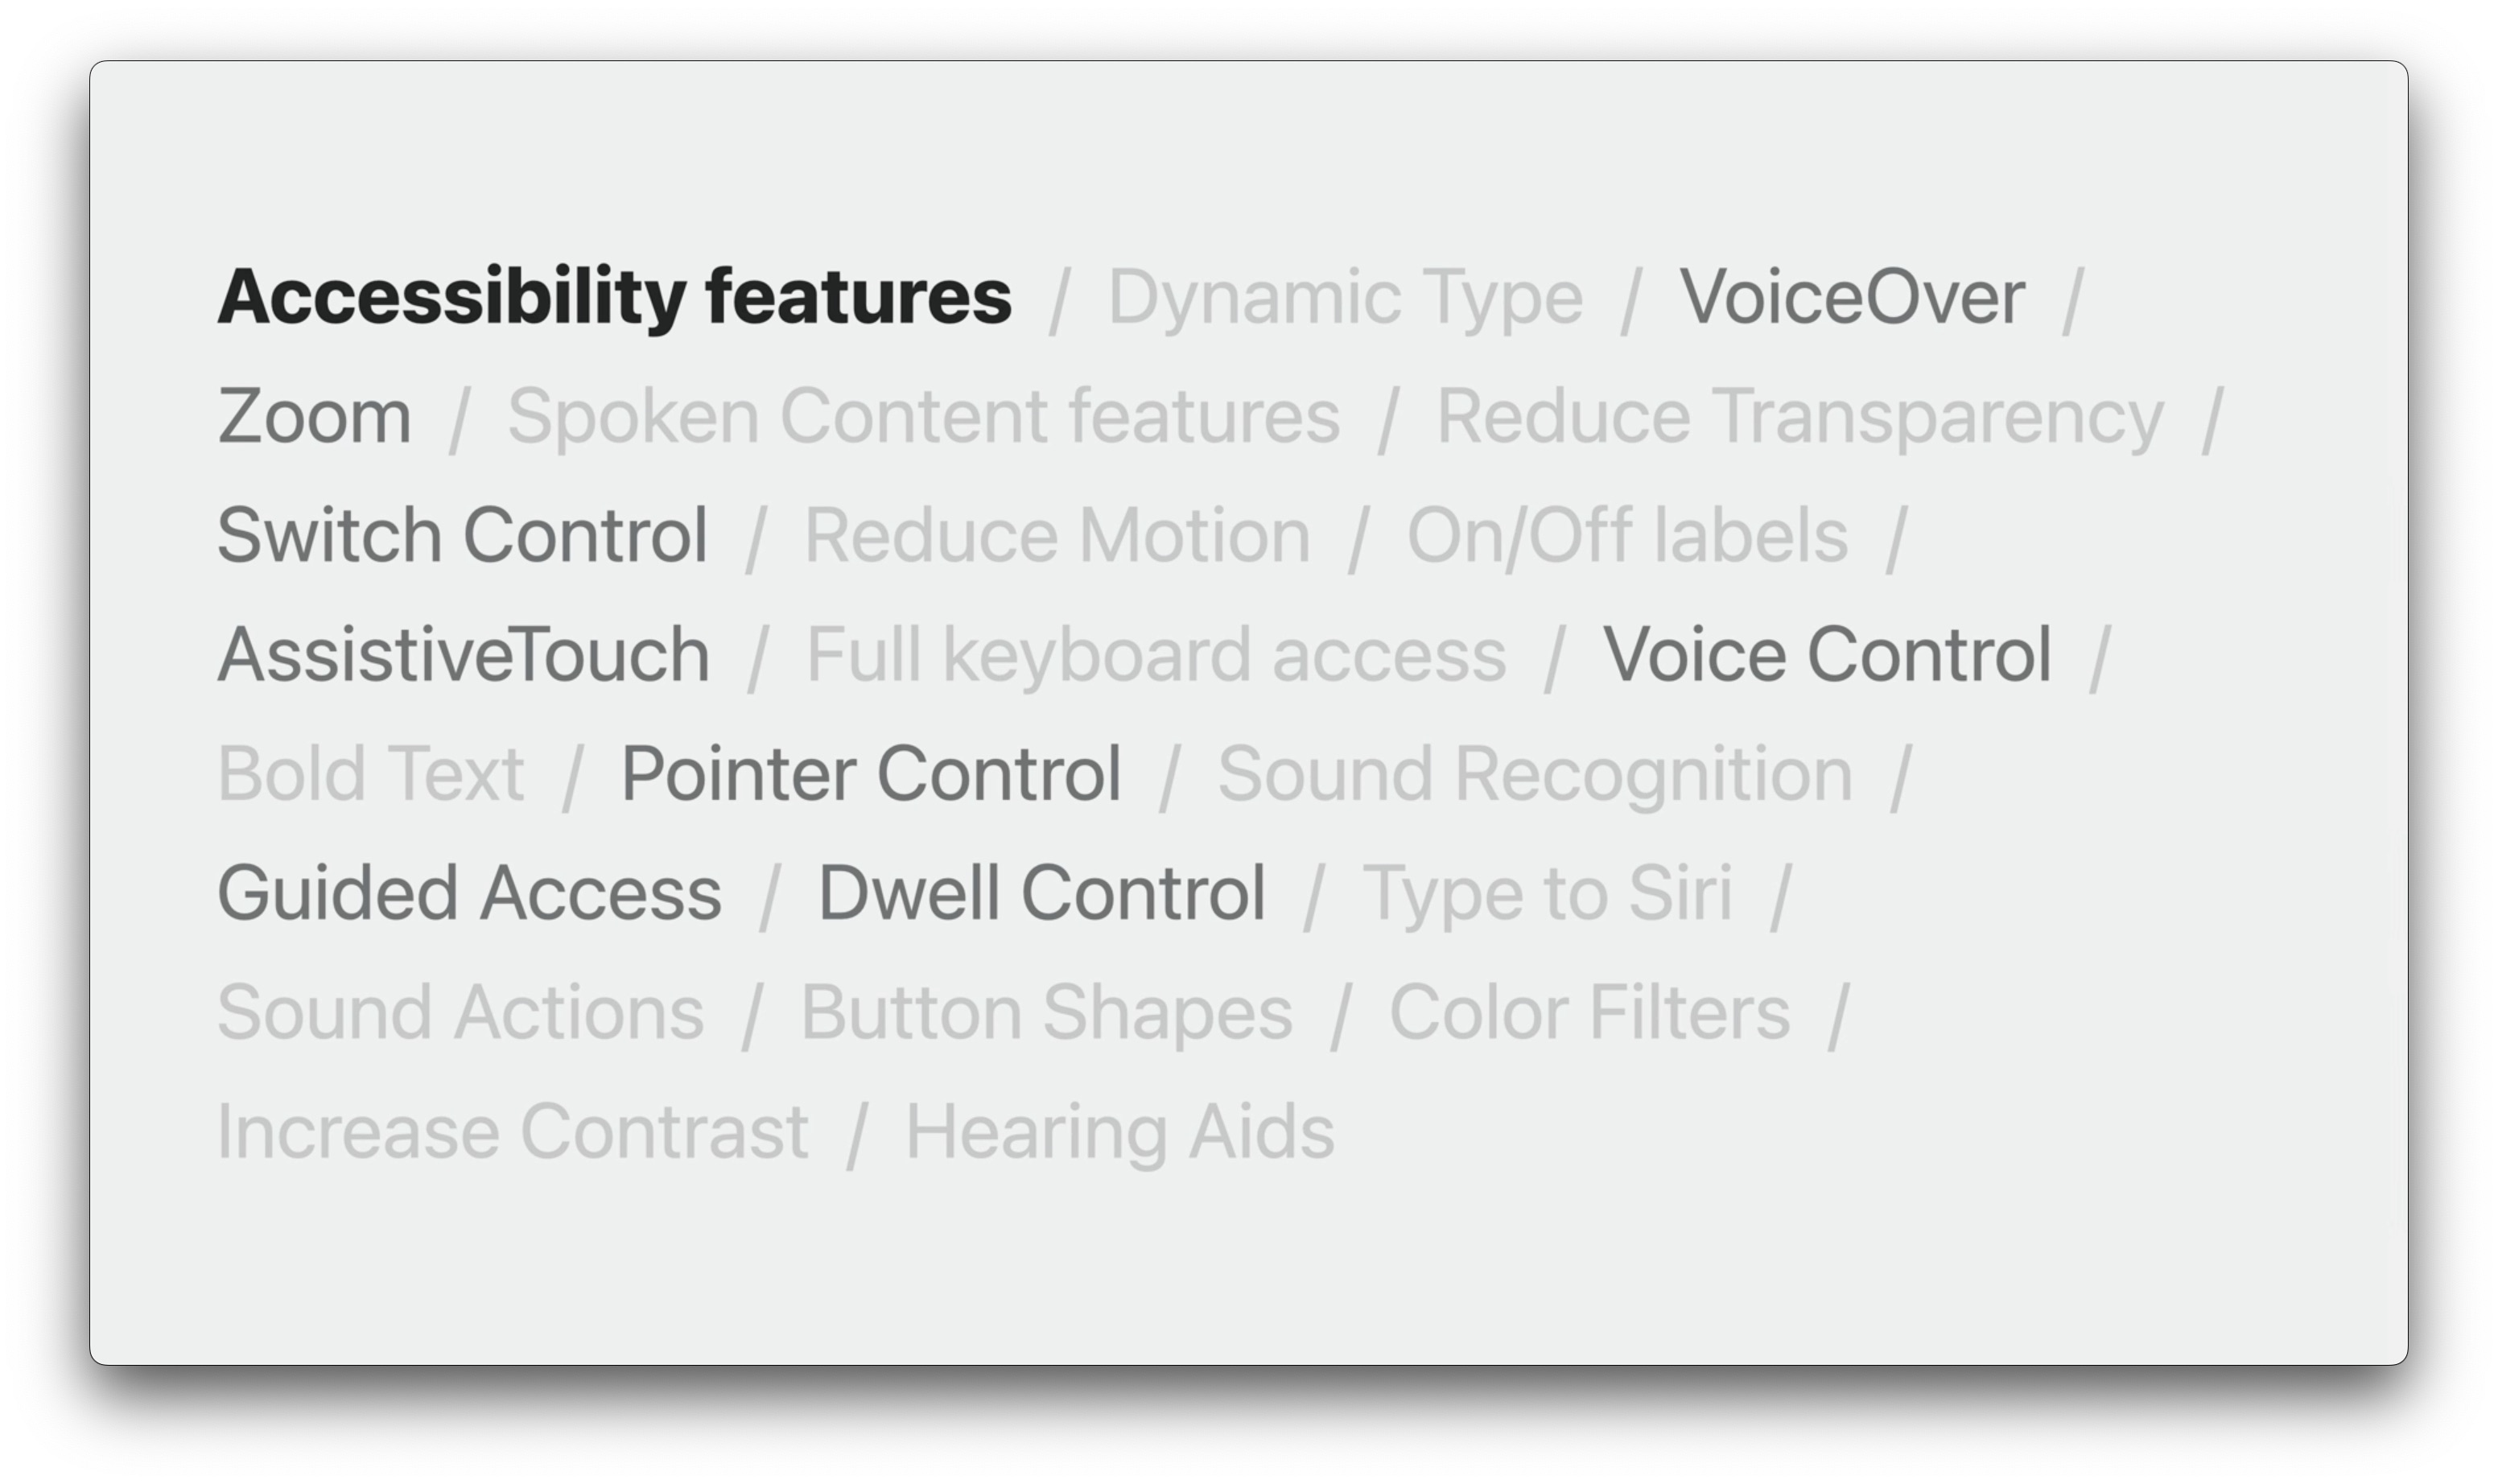 List of accessibility features included on visionOS